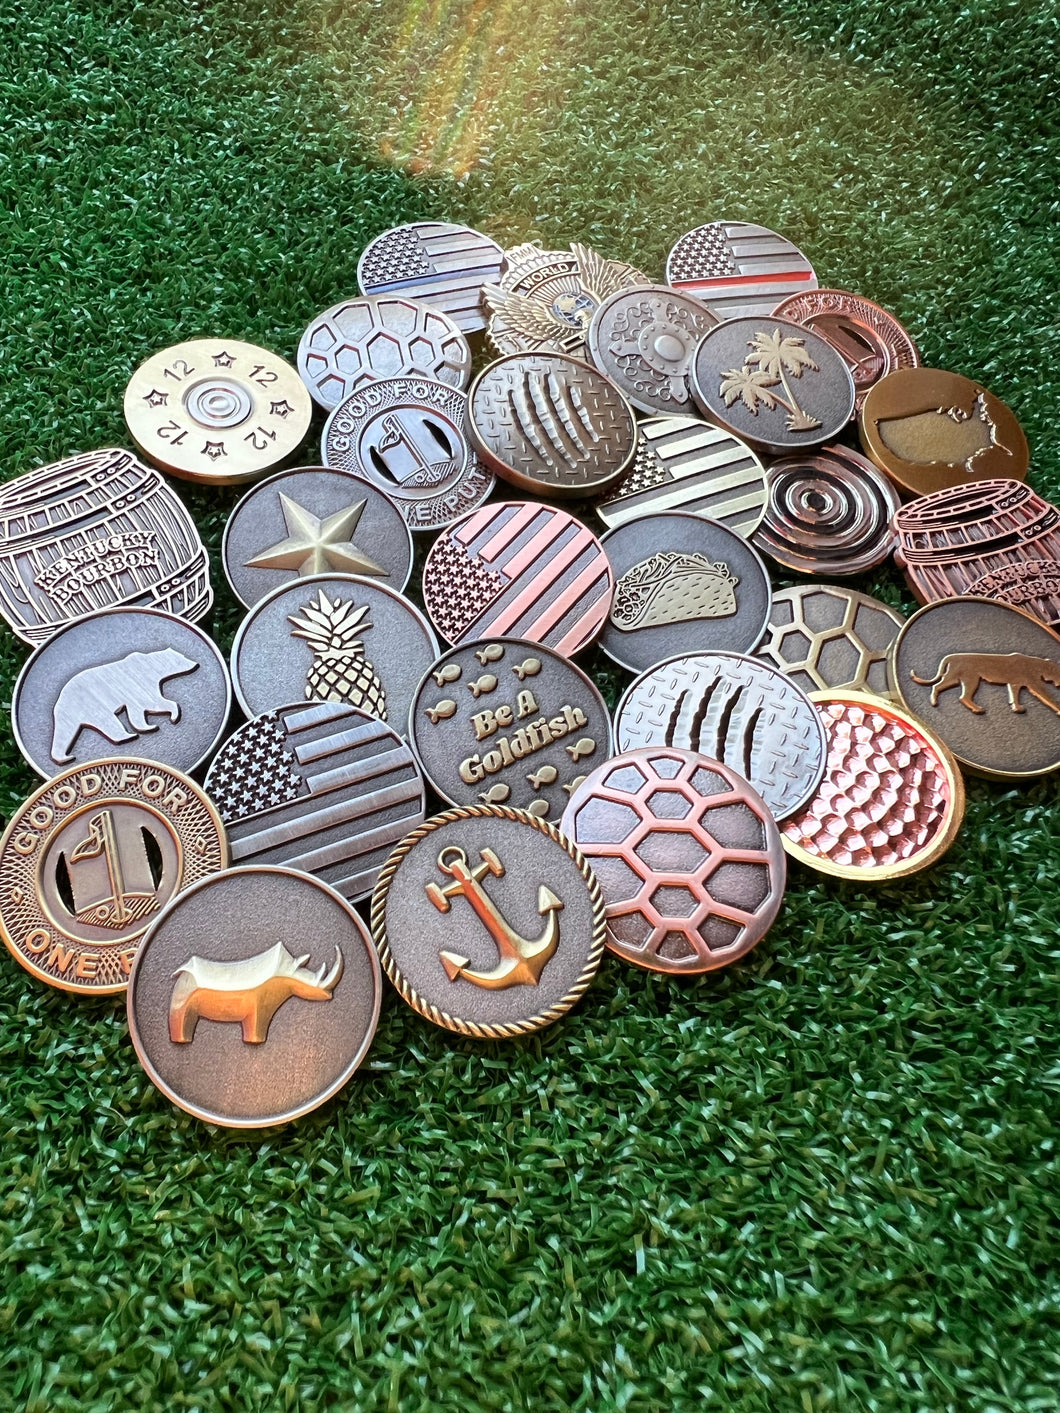 Mix and Match - Any 3 Golf Ball Markers - Free Shipping